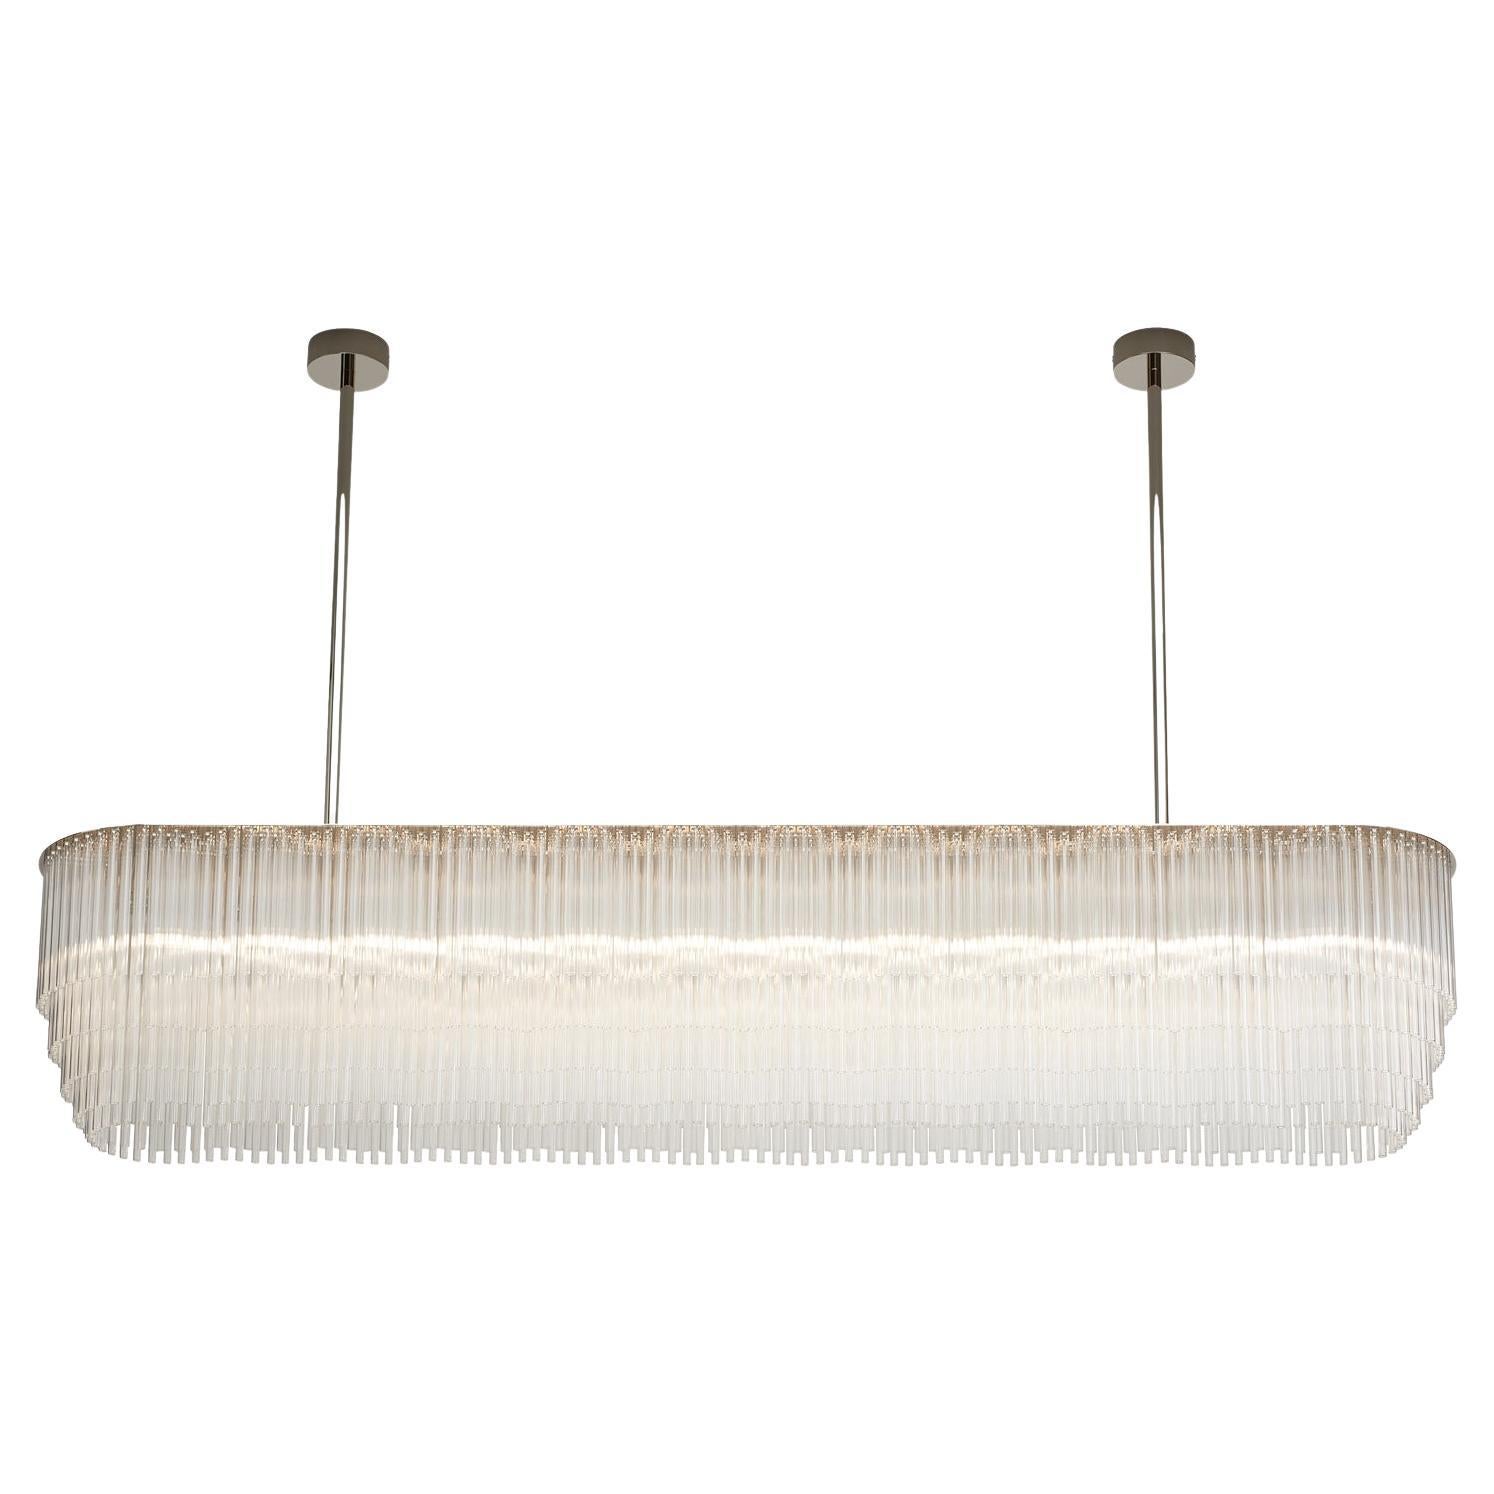 Linear Chandelier 1479mm / 58.25" in Polished Chrome with Tiered Glass Profile